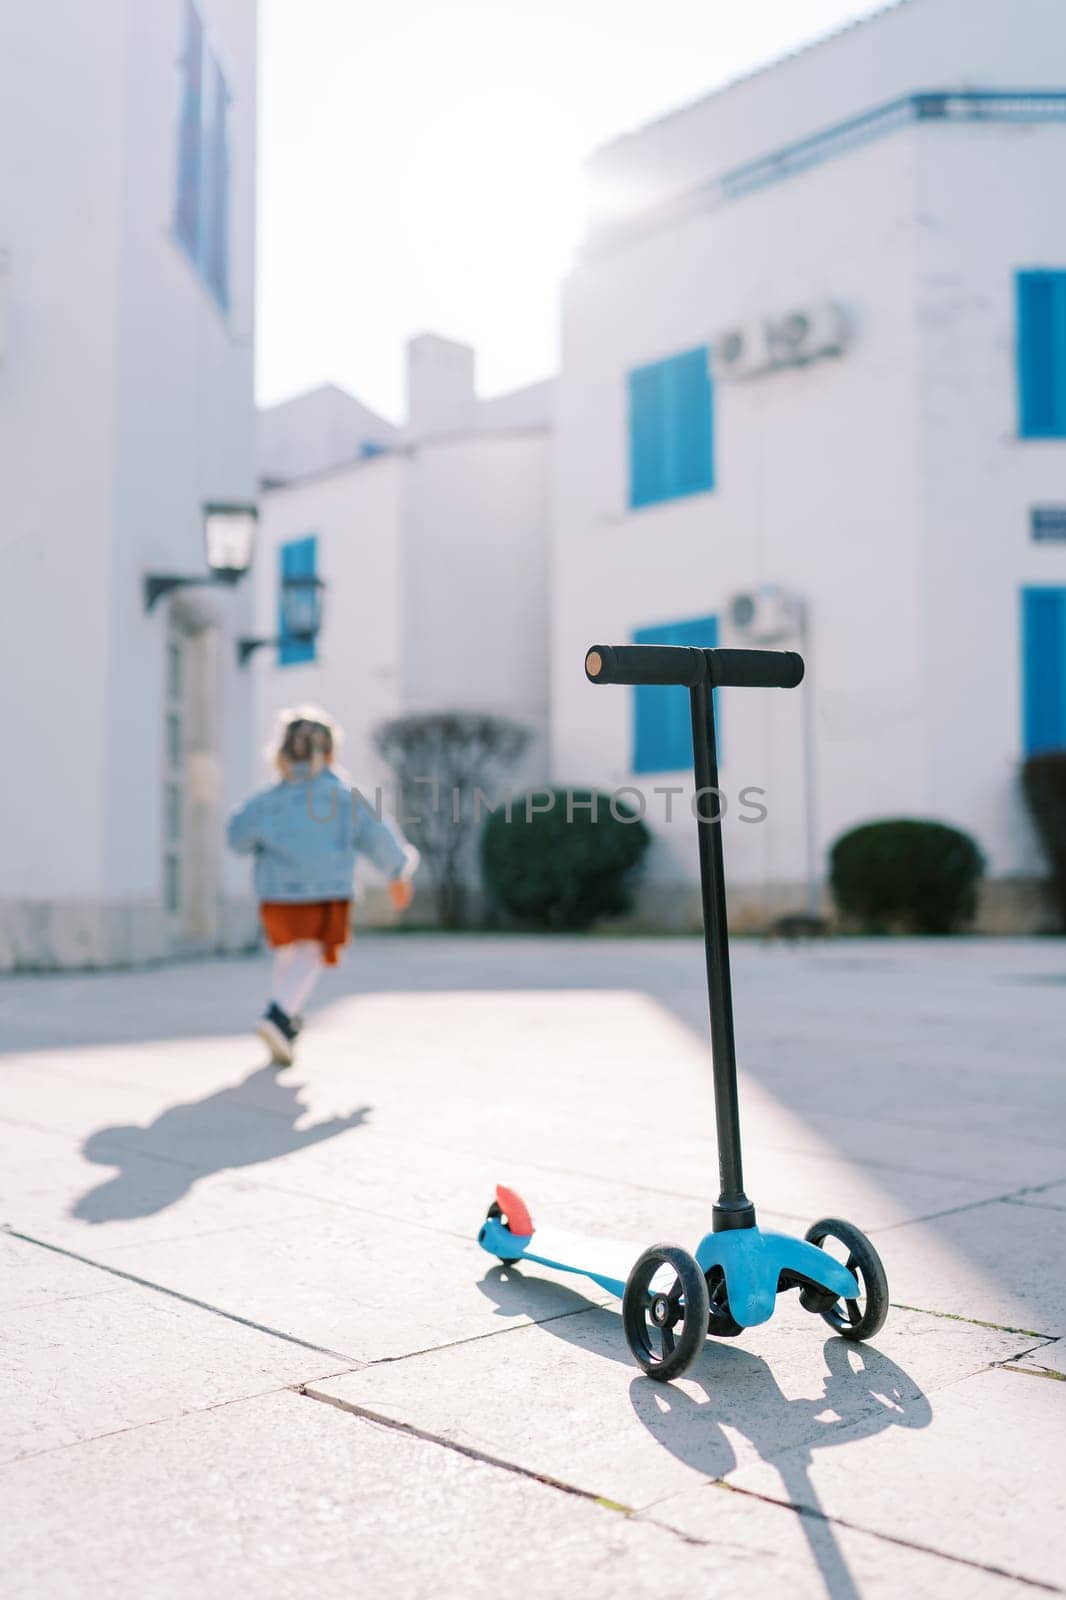 Scooter stands on a tile in the courtyard of the house against the background of a little girl walking forward. High quality photo